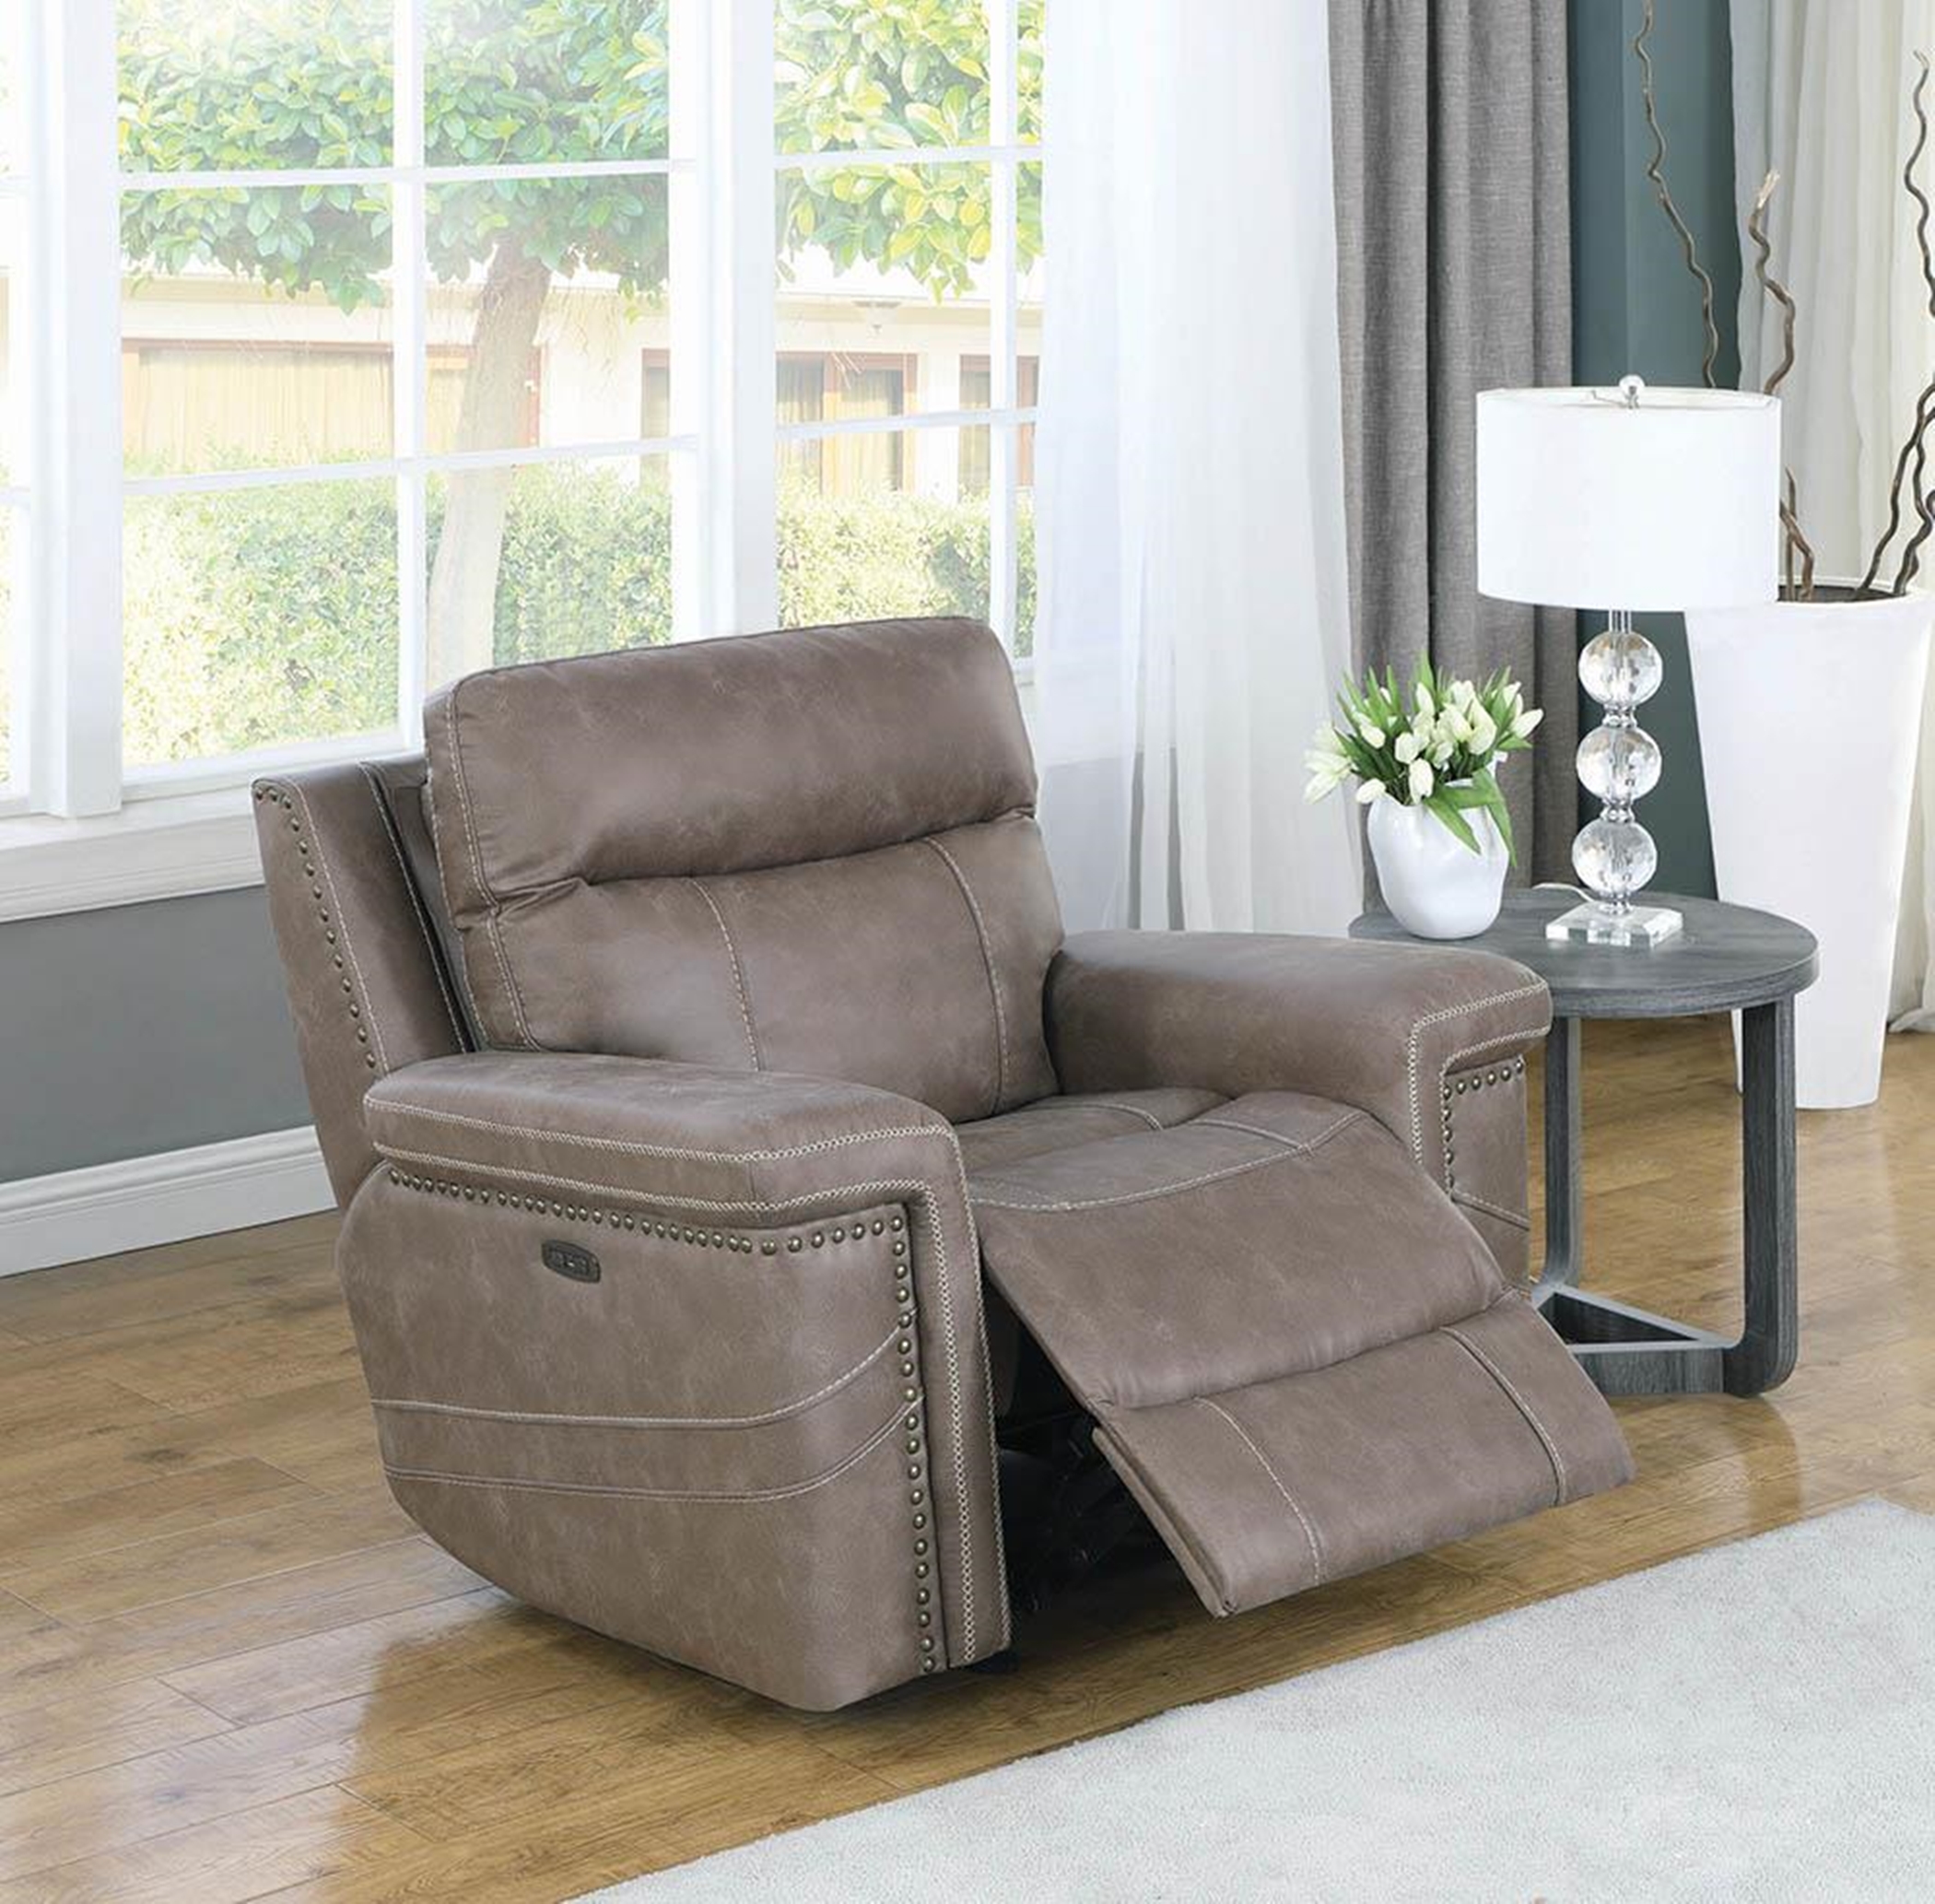 Wixom Taupe Power2 Glider Recliner